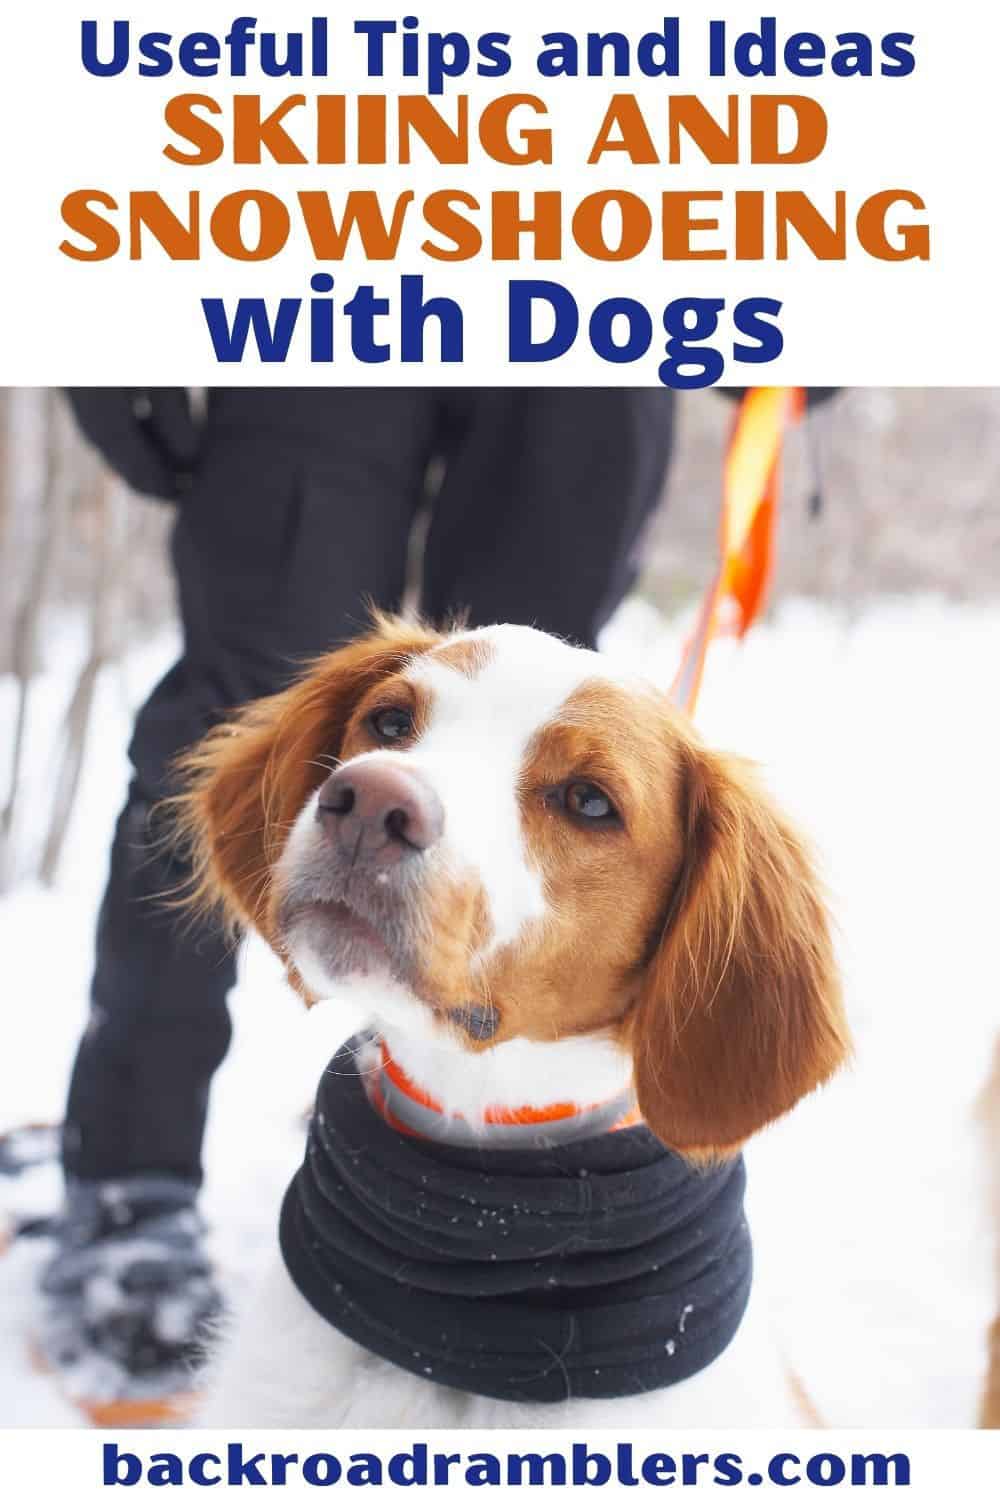 A brown and white dog stands in the snow looking toward the camera. Text overlay: Best tips and ideas for Snowshoeing with dogs.